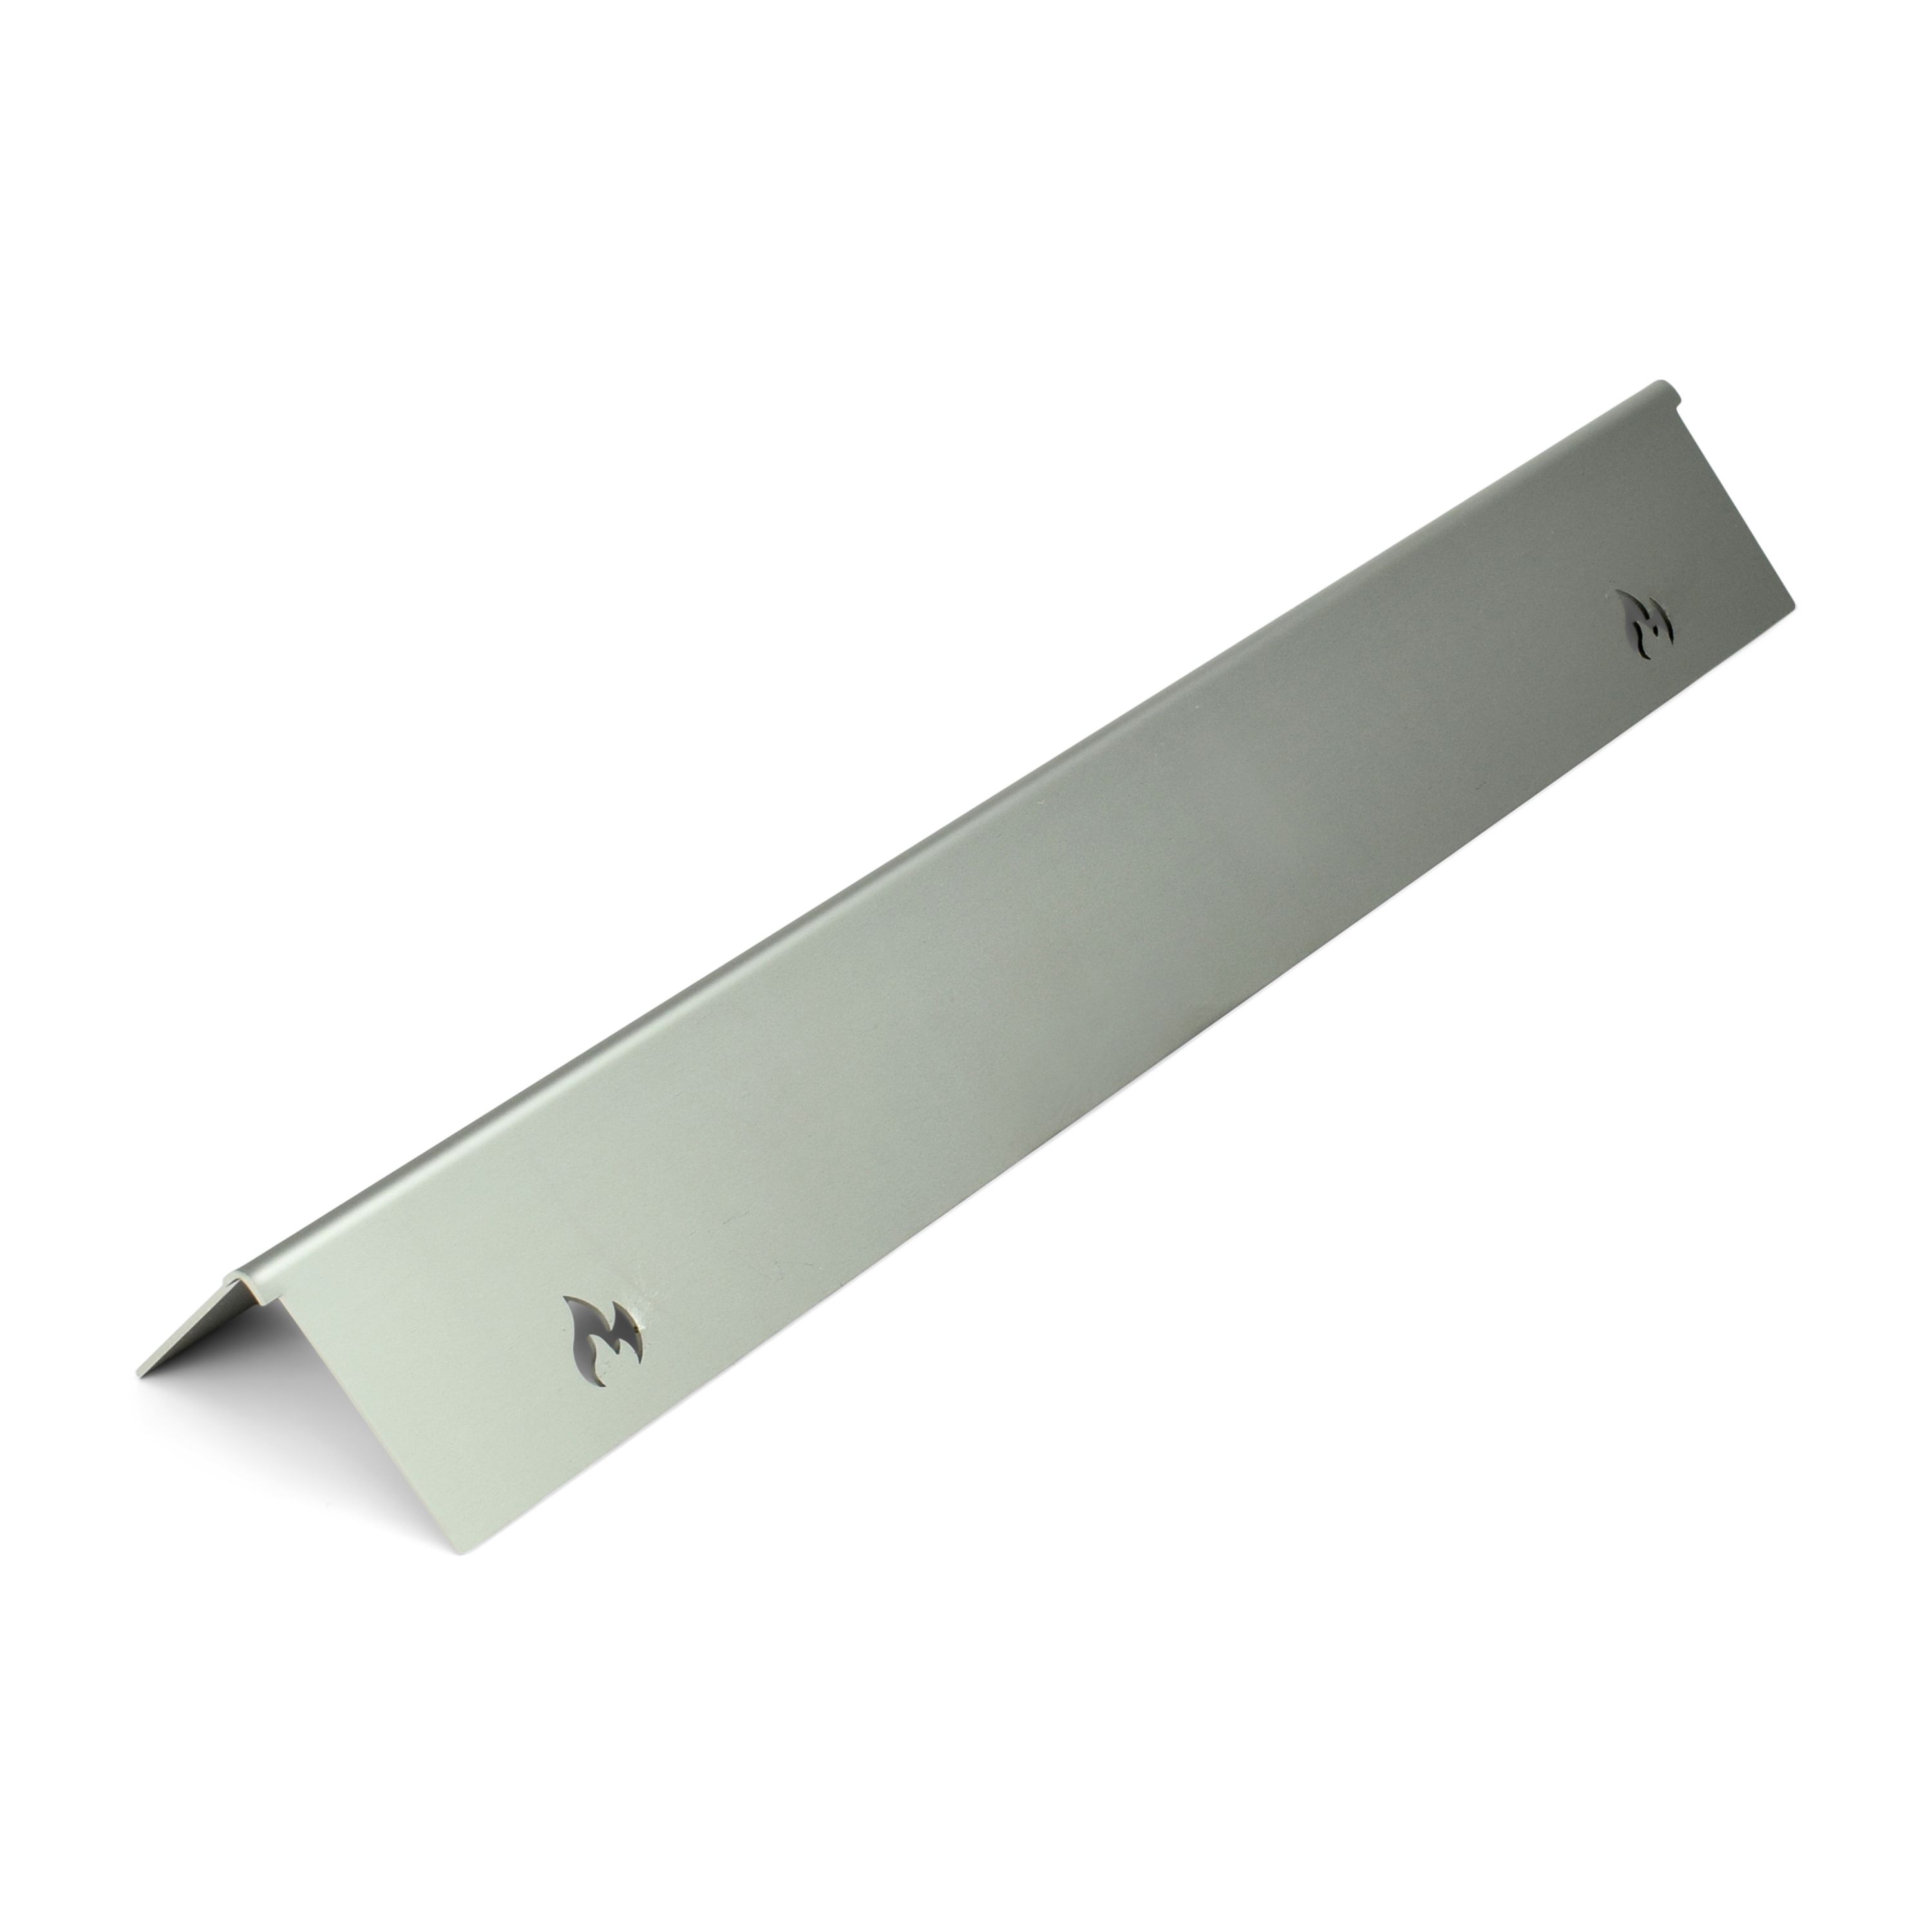 Stainless steel flavouring bar for Napoleon